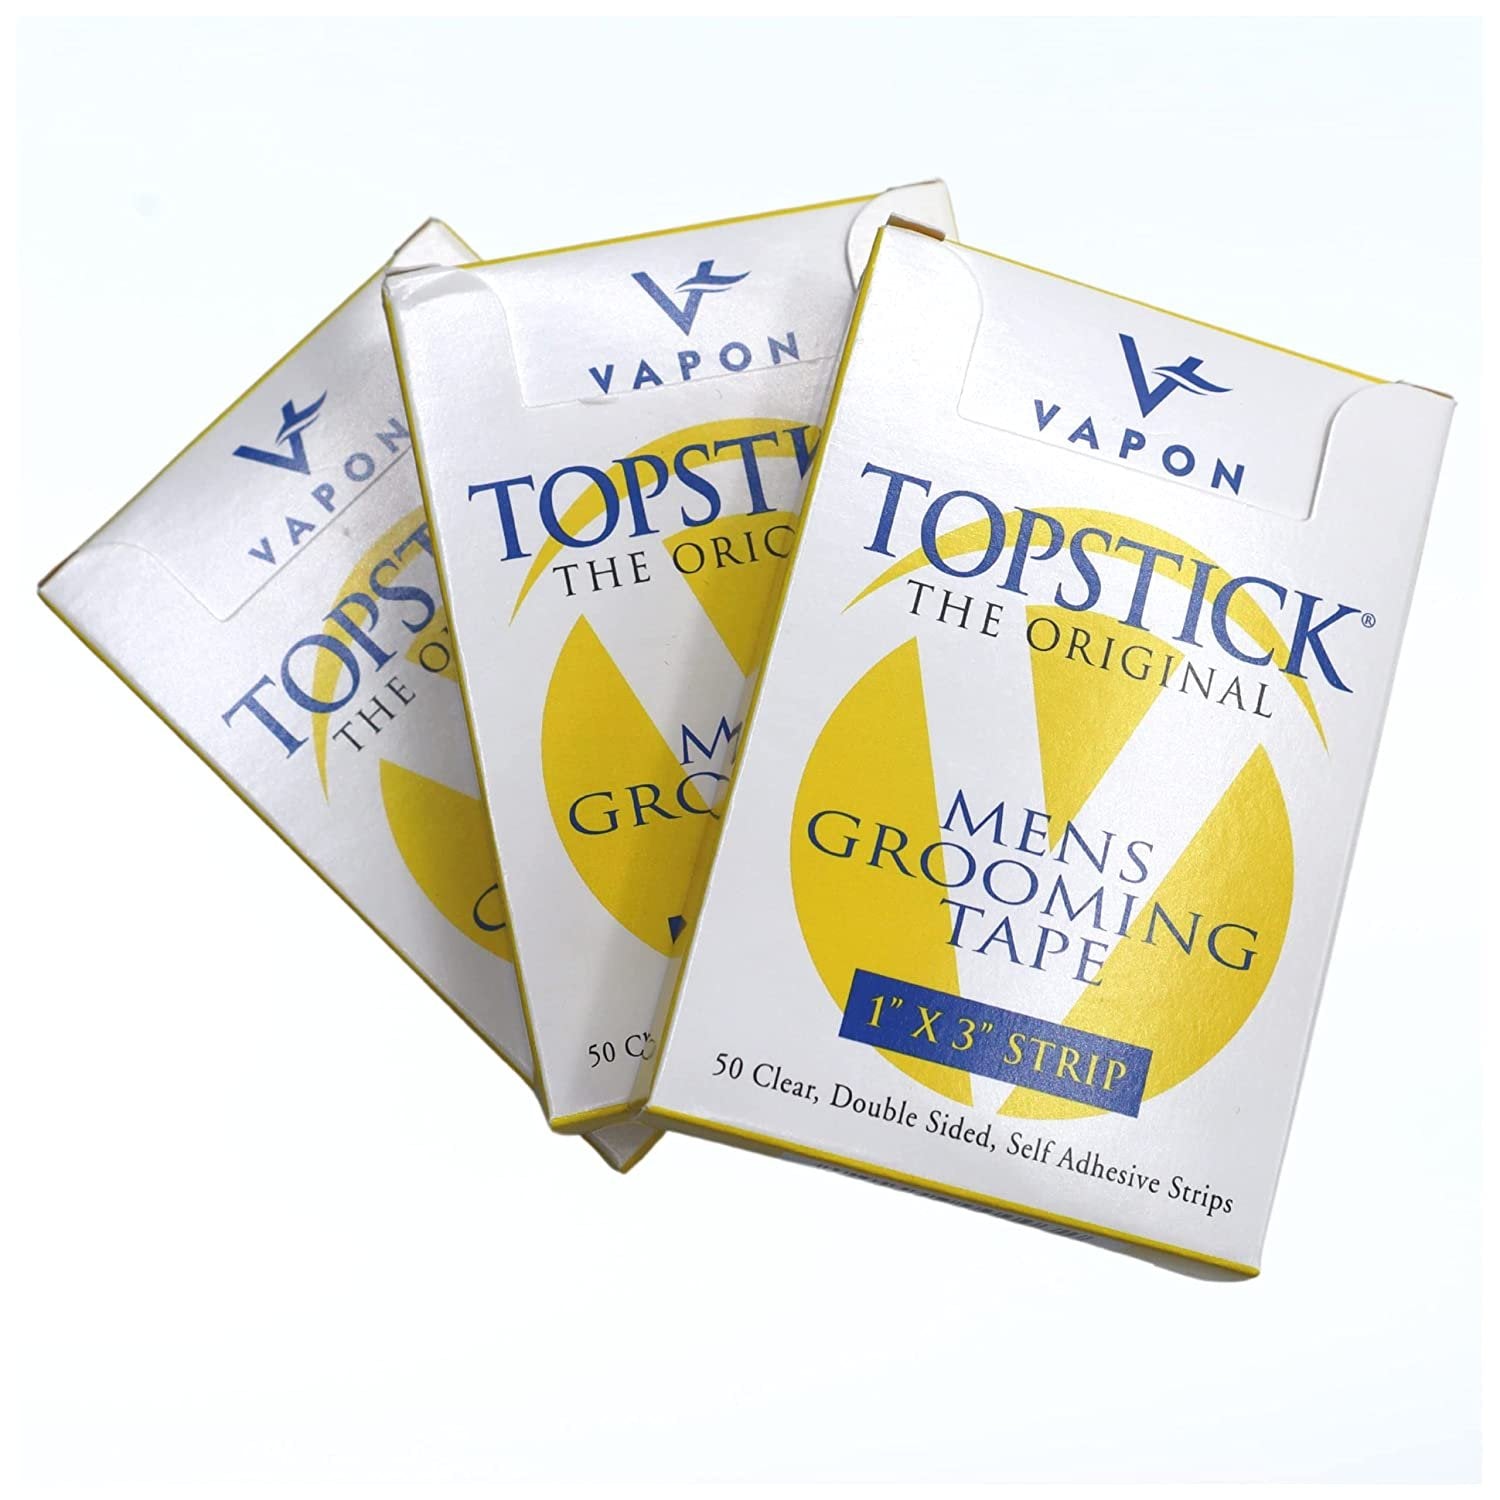 Topstick Men's Clear Double Sided Grooming Tape Bundle - (1 Box of 50  Strips) 1 x 3 & (1 Box of 50 Strips) 1/2 x 3